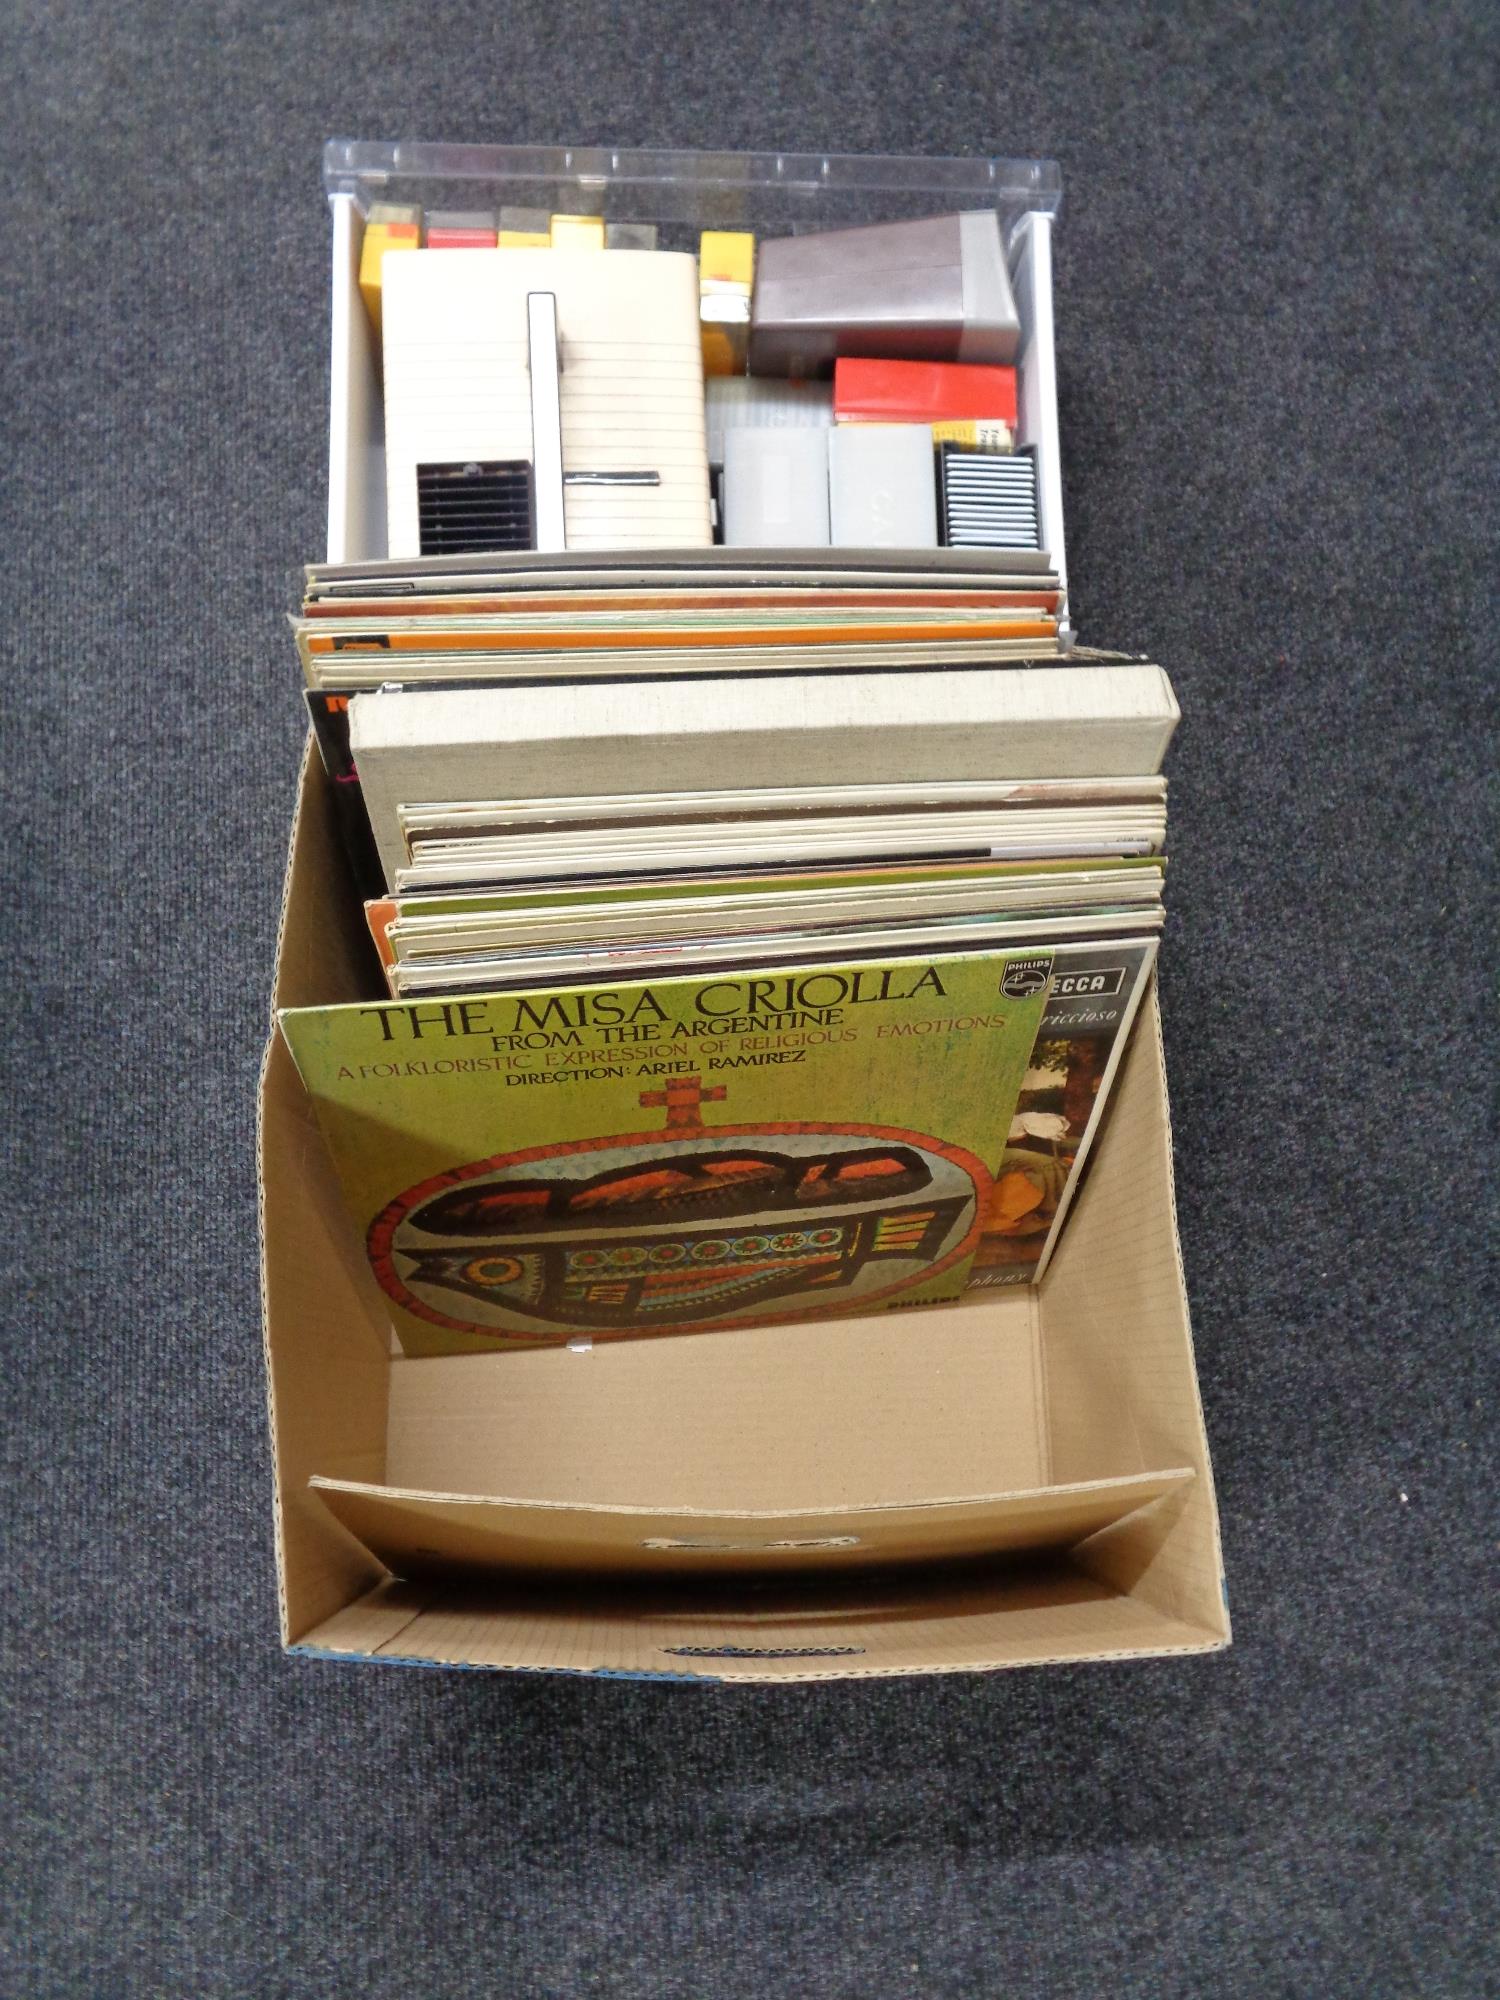 A box of lps, pictures, projector,